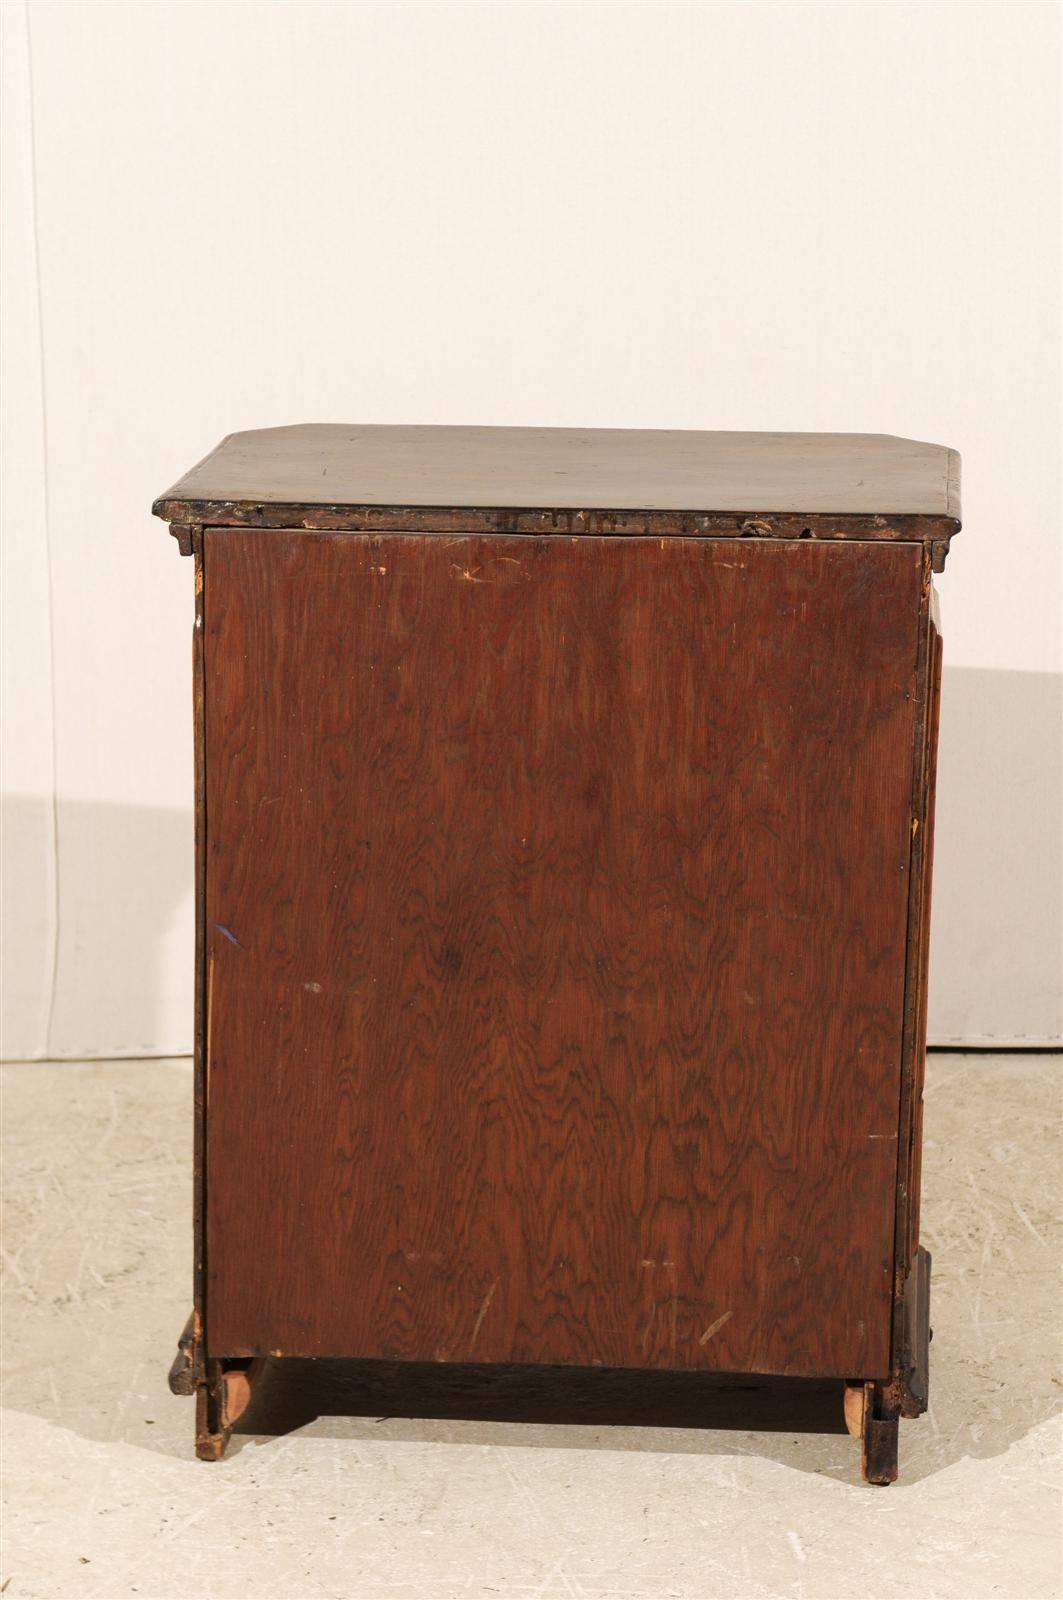 An Italian Early 19th Century Small Shelf Cabinet with Nice Wood Grain Visible 5